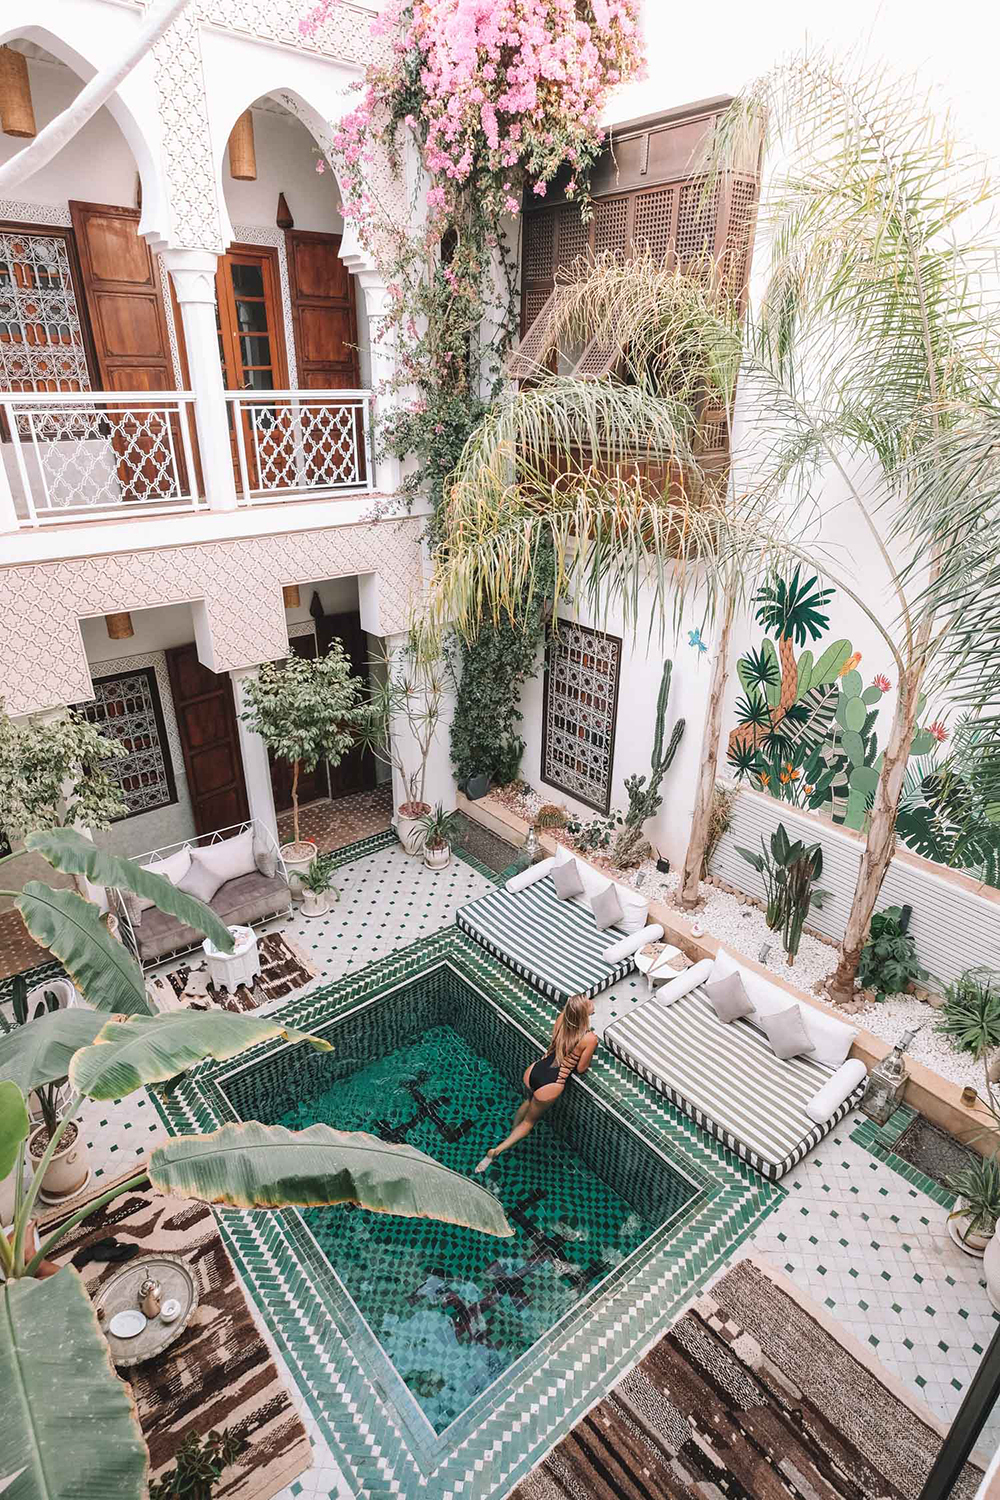 Description: Ever since I first saw the plaster buildings and amazing tiled mosaic floors, I've been dying to make a trip to Marrakech. I've had my eye on the perfectly elegant and minimalistic B&B Riad 42 for the stay (this insta-famous spot is a close runner up) and dream of hot sunny days full of vibrant markets, linen and sandals, mint tea and strolling the dusty maze-like streets. 